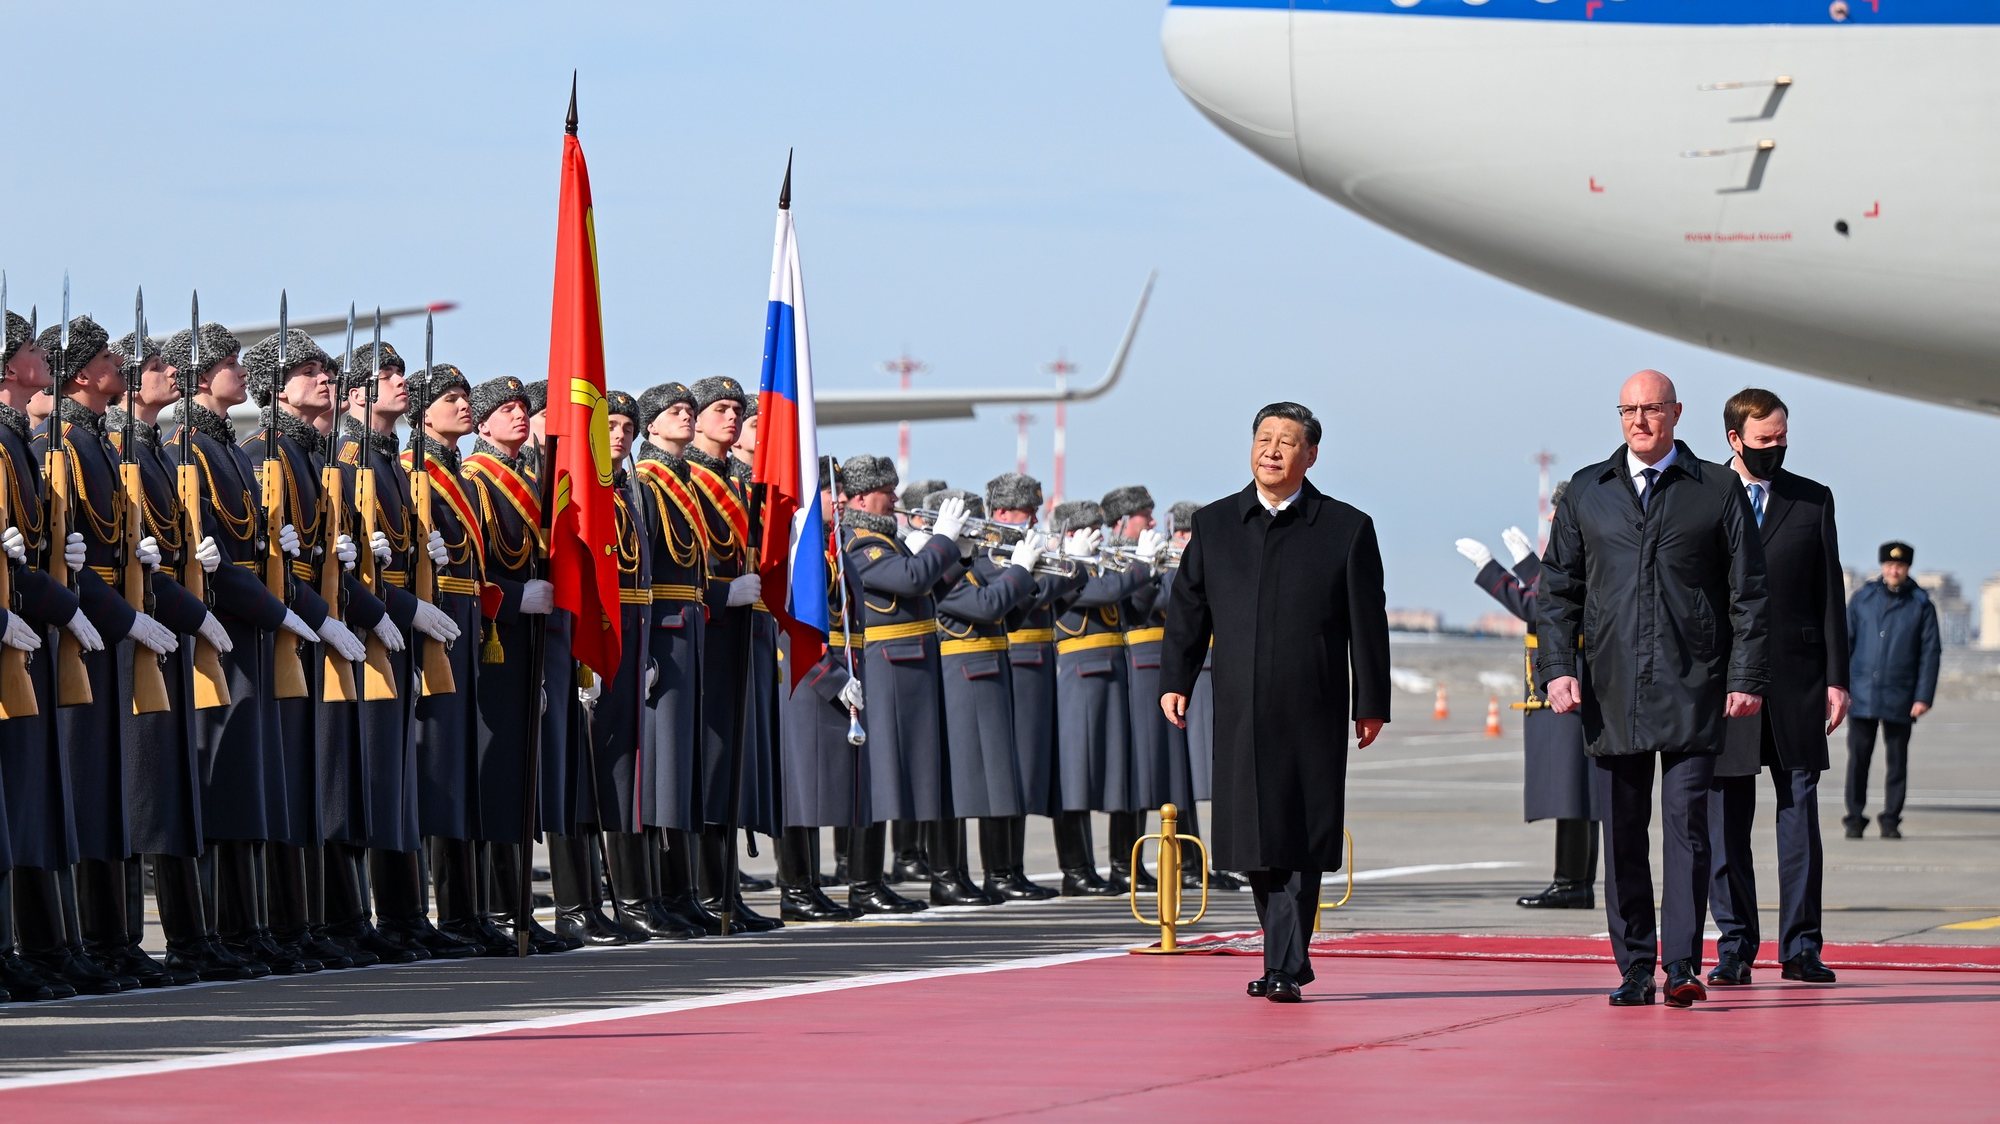 epa10534501 Chinese President Xi Jinping is greeted by Russian Deputy Prime Minister Dmitry Chernyshenko and other senior Russian officials upon his arrival at Moscow Vnukovo Airport in Moscow, Russia, 20 March 2023.  EPA/XINHUA / Xie Huanchi CHINA OUT / MANDATORY CREDIT  EDITORIAL USE ONLY